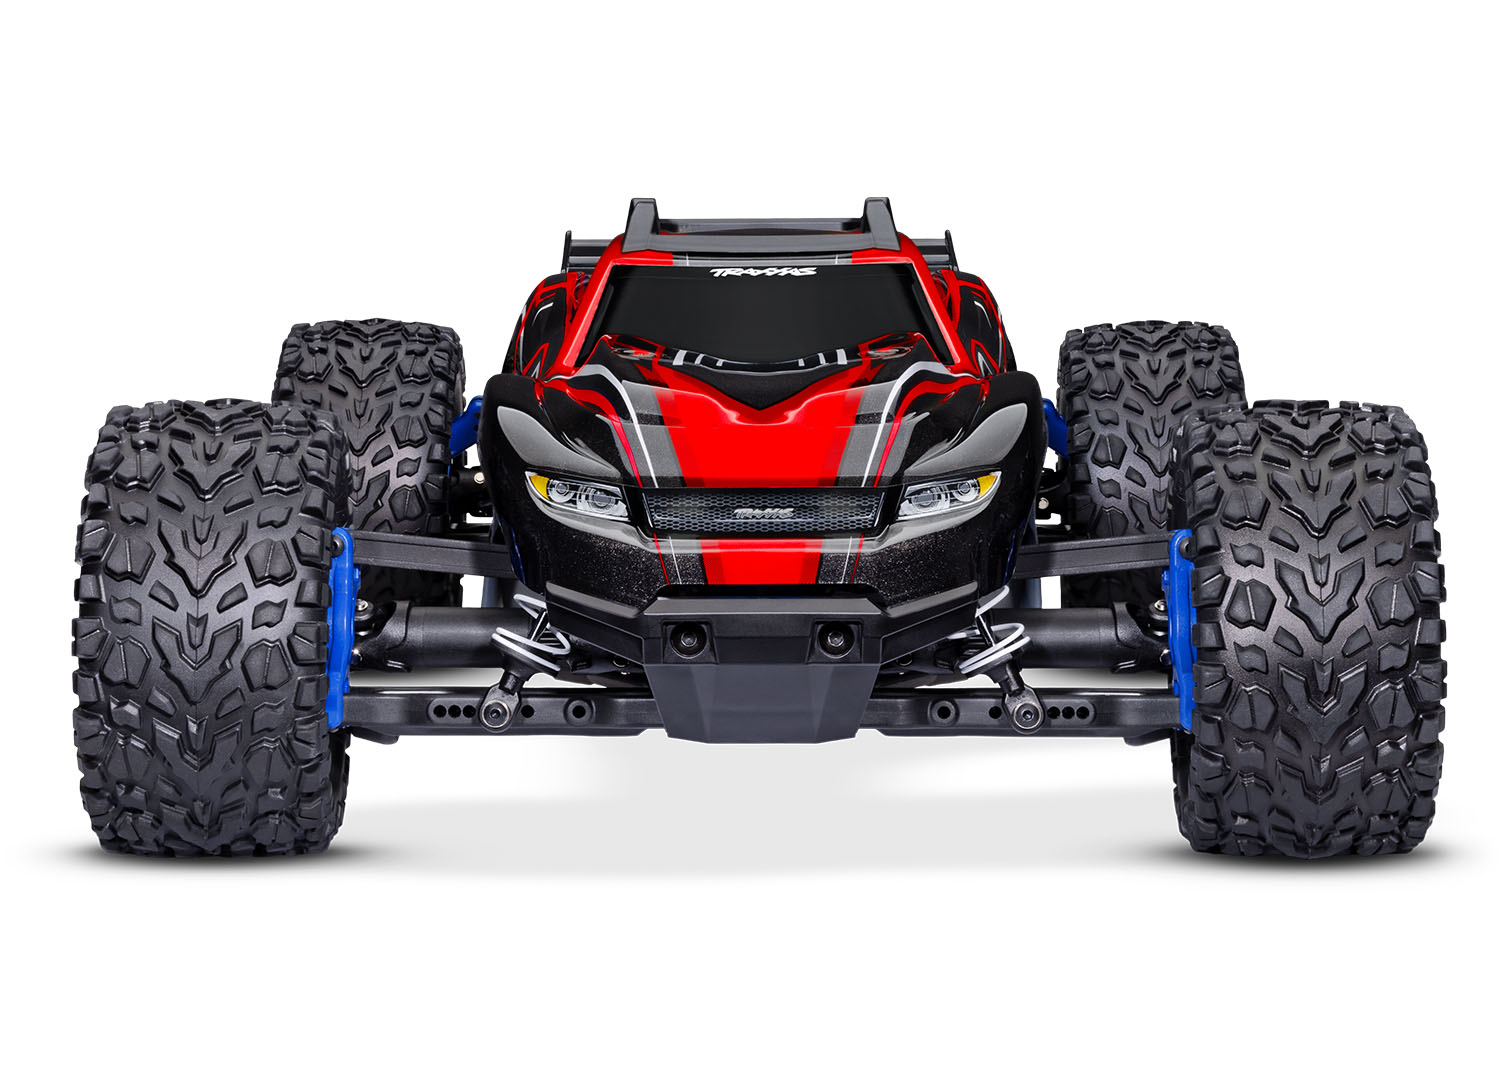 Carrosserie Rustler 4x4 rouge (montage sans clips) - Traxxas 6740-RED